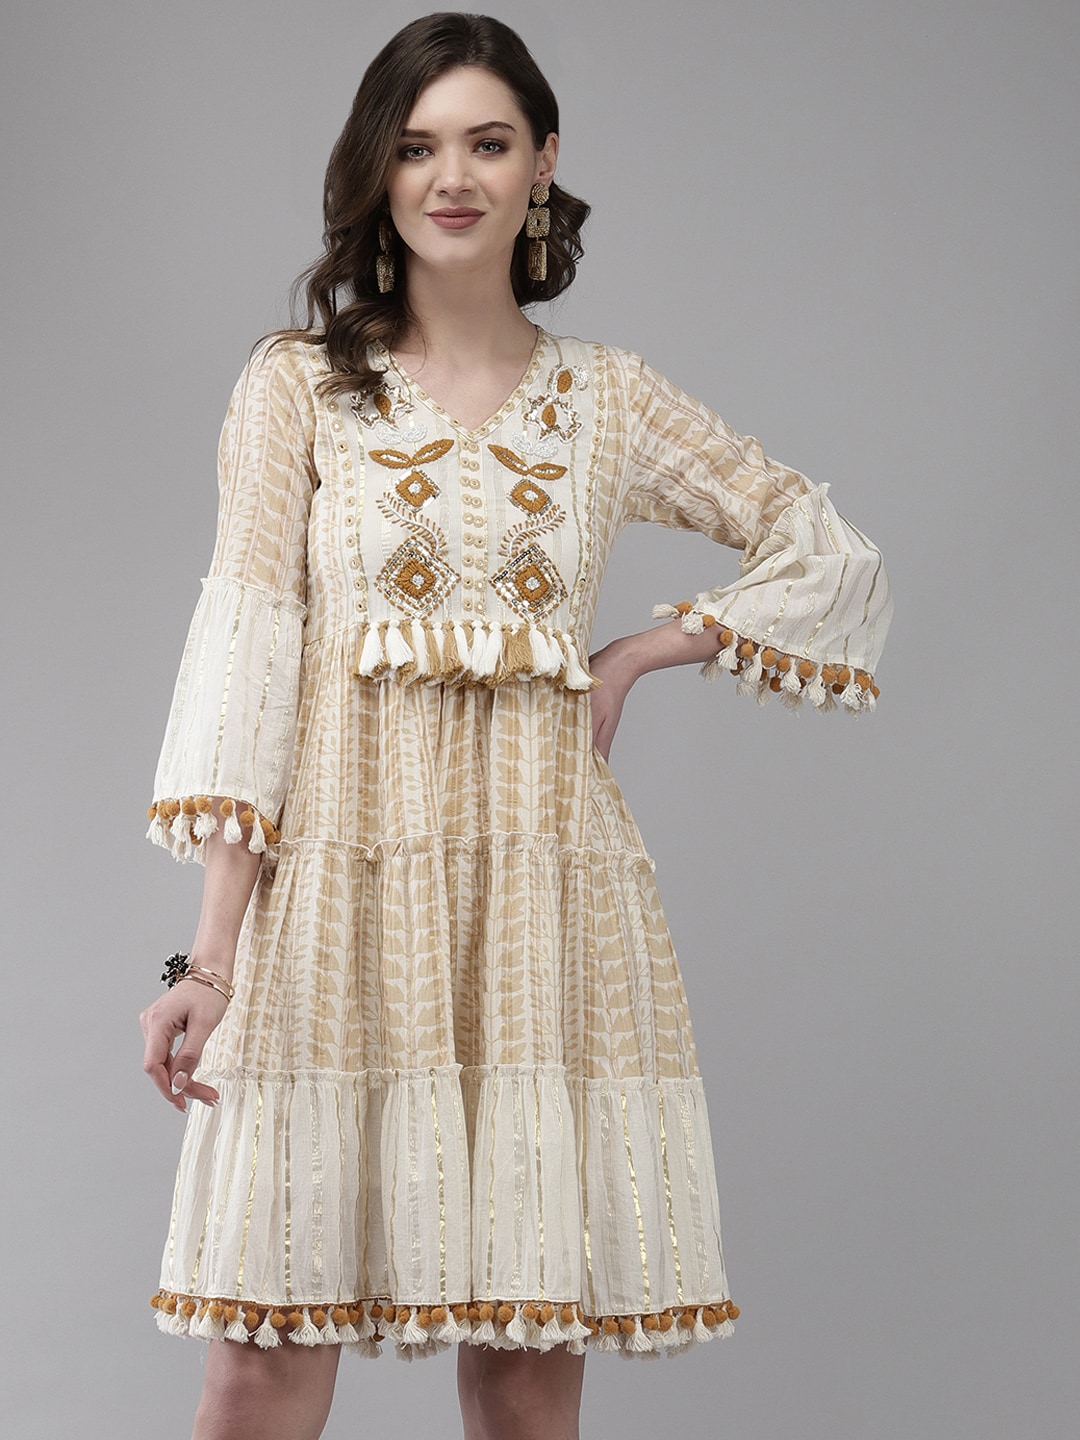 Ishin Off White Floral Embroidered A-Line Dress Price in India